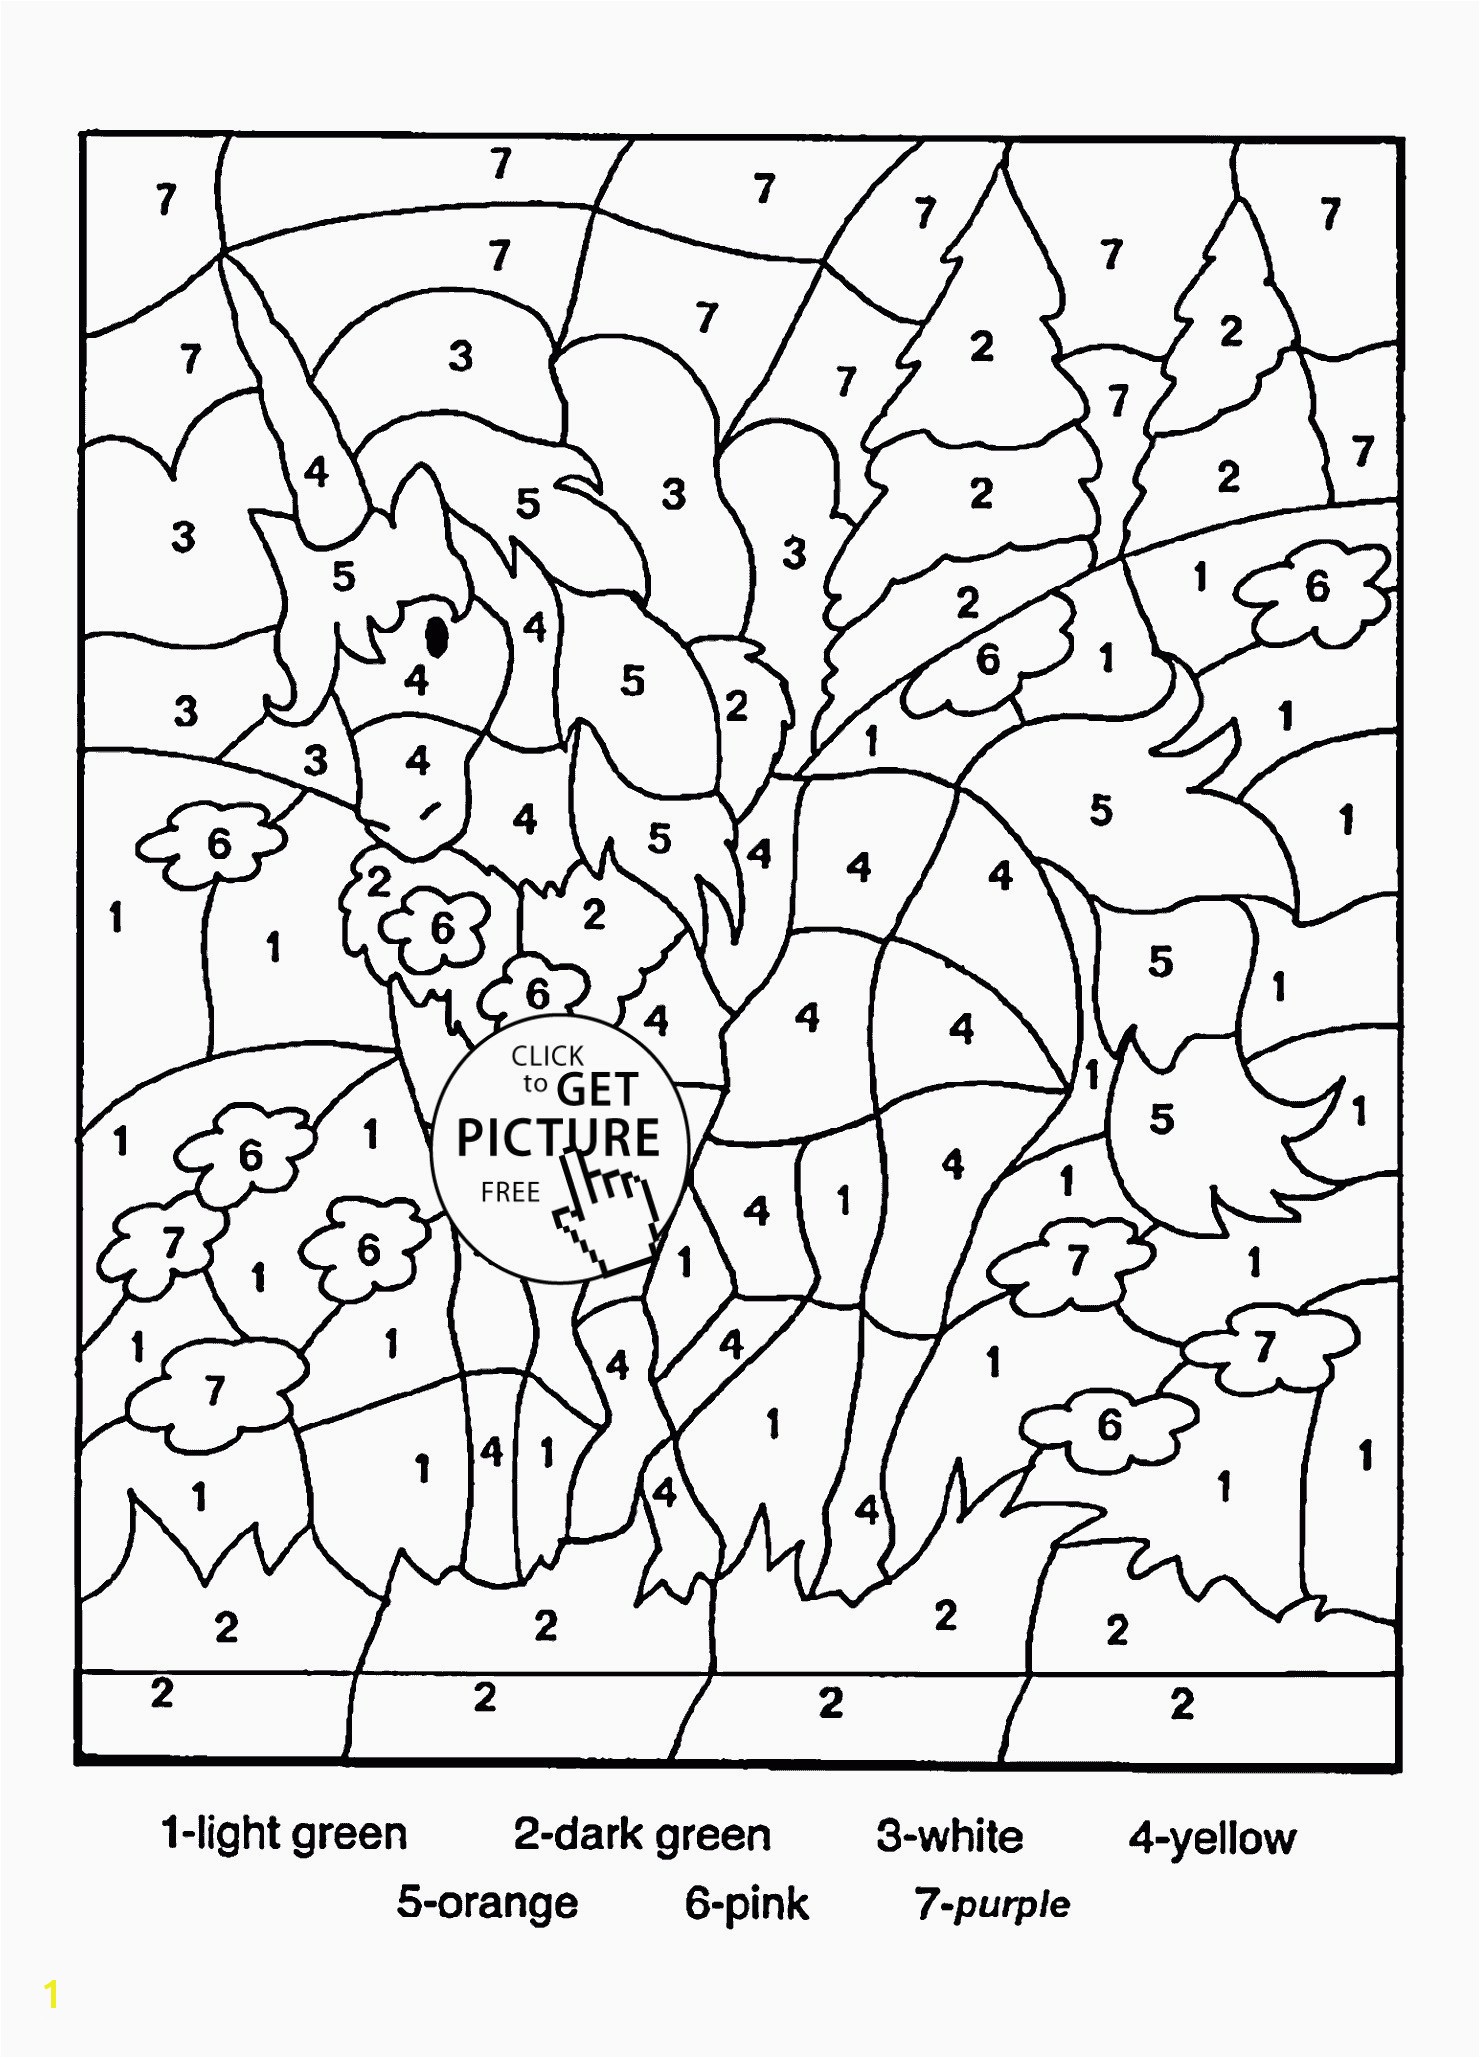 Sonoran Desert Coloring Pages Printable Coloring Pages Archives Page 26 Of 85 Katesgrove